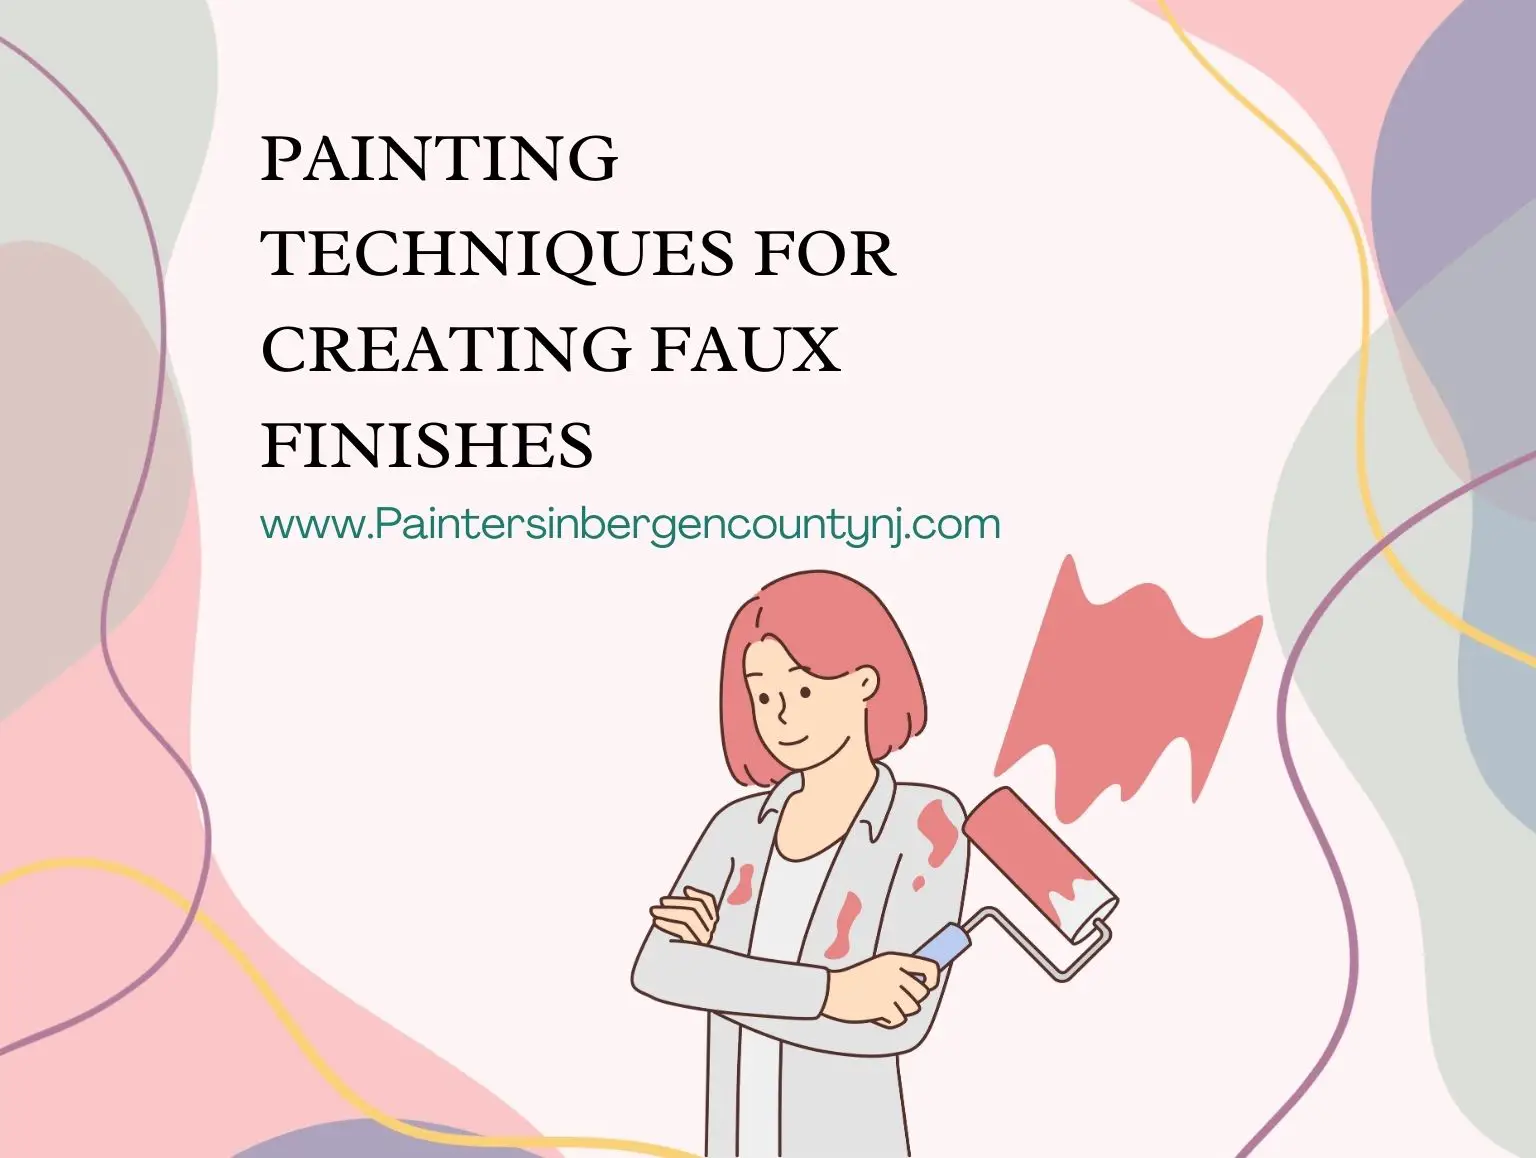 Painting Techniques for Creating Faux Finishes